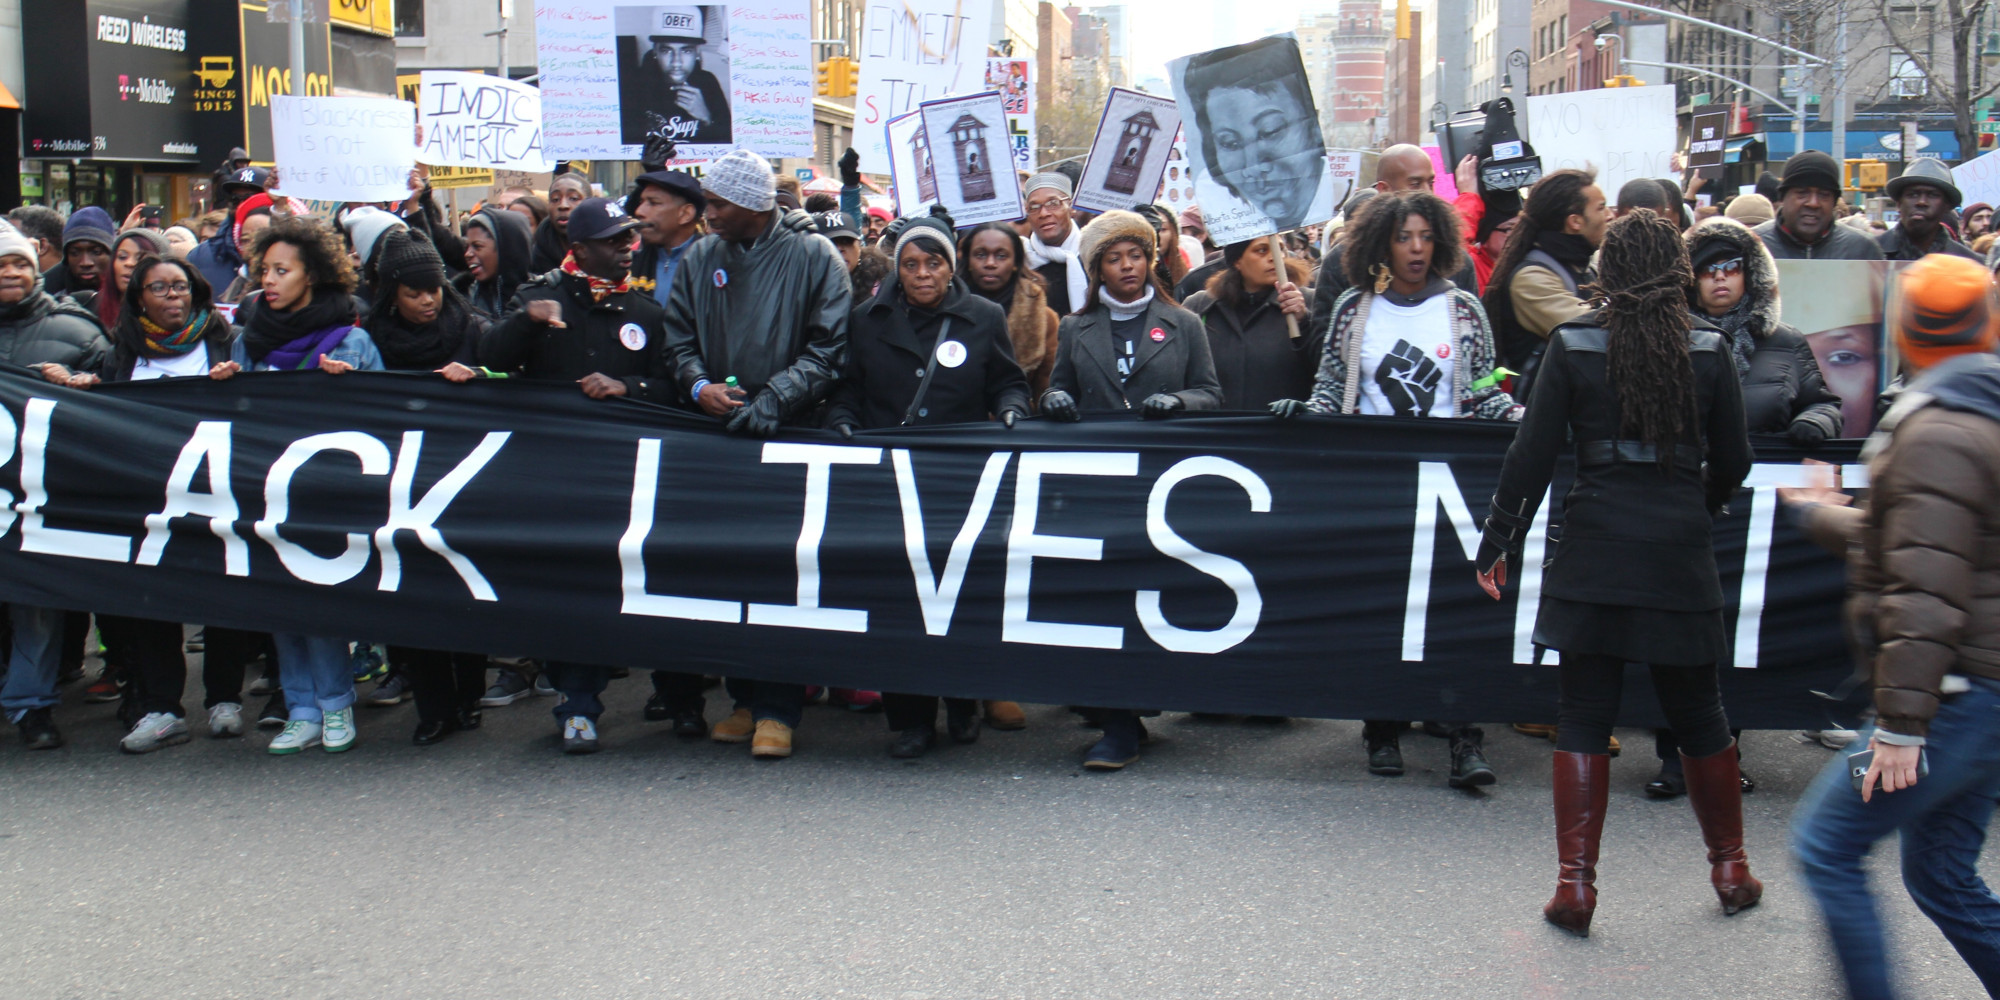 If you donated money to Black Lives Matter, you might have been snookered